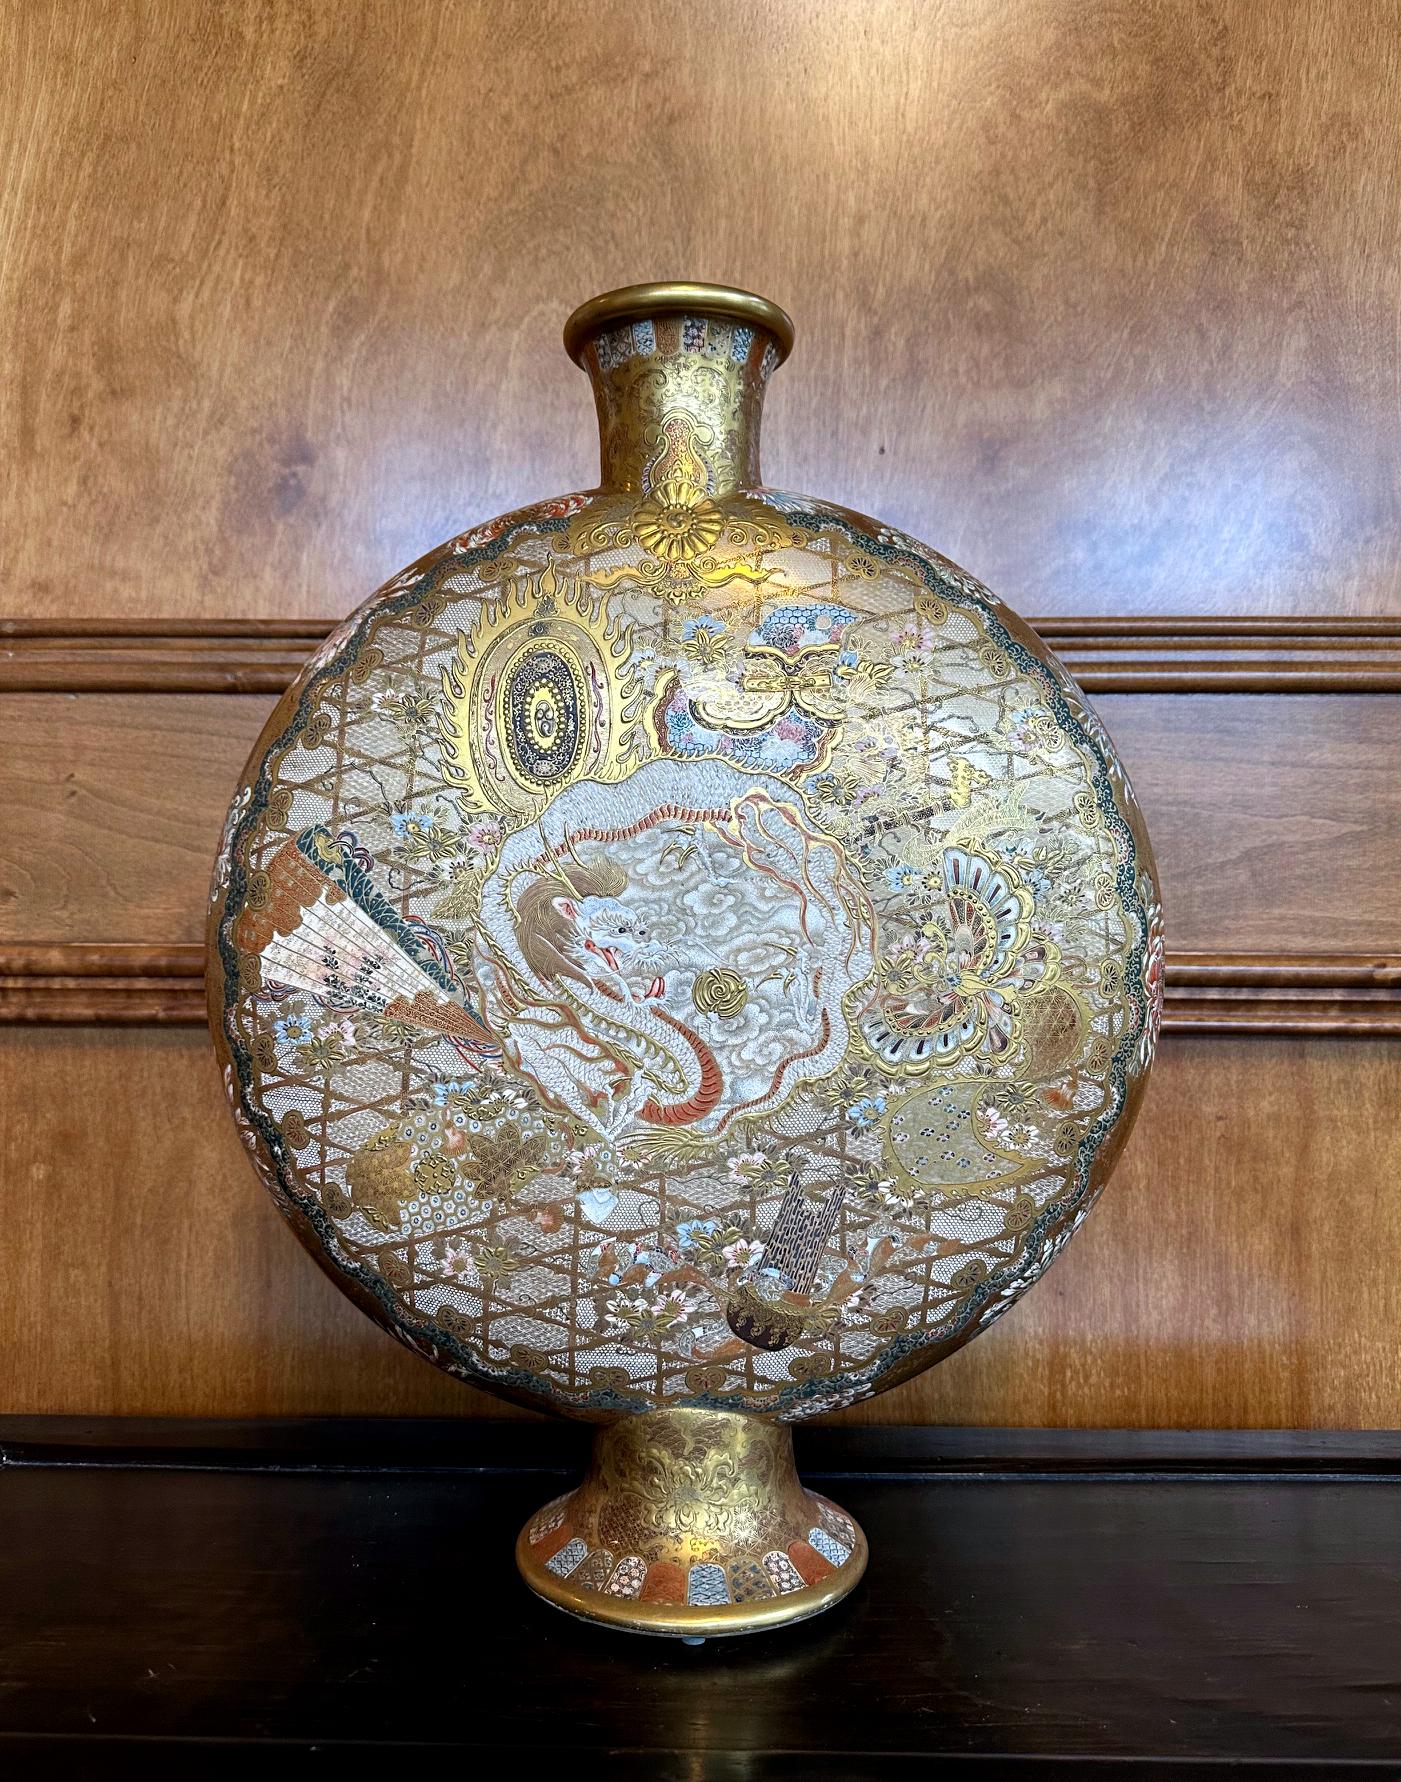 A large and rare Japanese ceramic vase of exceptional quality from late Meiji period circa 1900-10s by Kinkozan (1645-1927). One of the largest studio manufacturers of the export ceramics at the time based in Kyoto. In the typical decorated style of